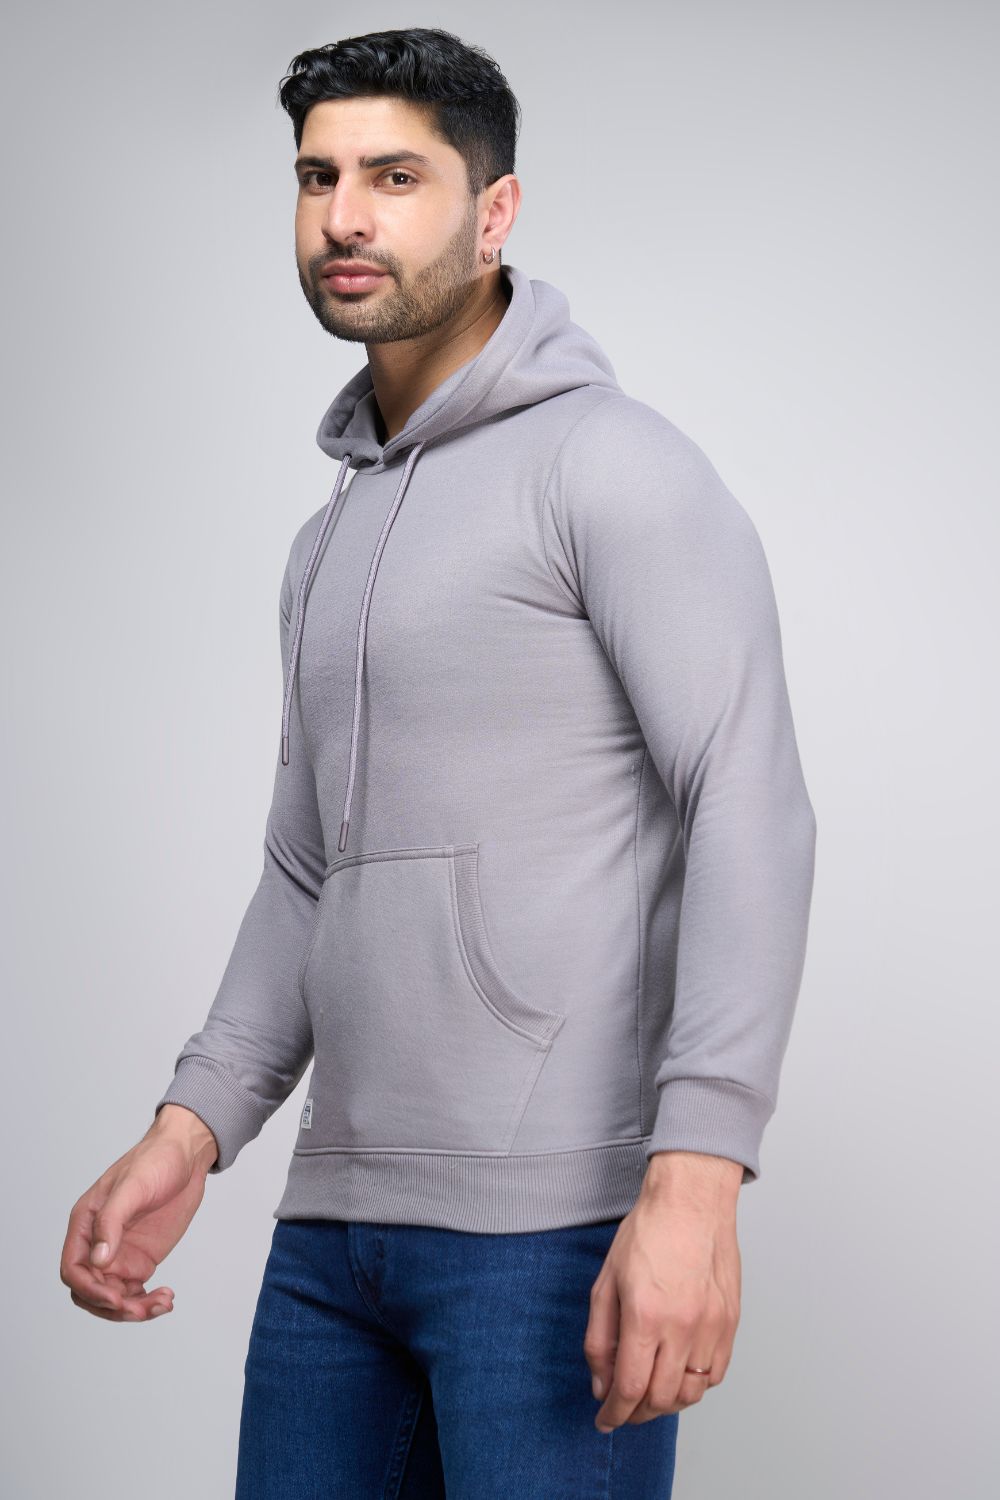 Grey Mist colored, hoodie for men with full sleeves and relaxed fit, side view.